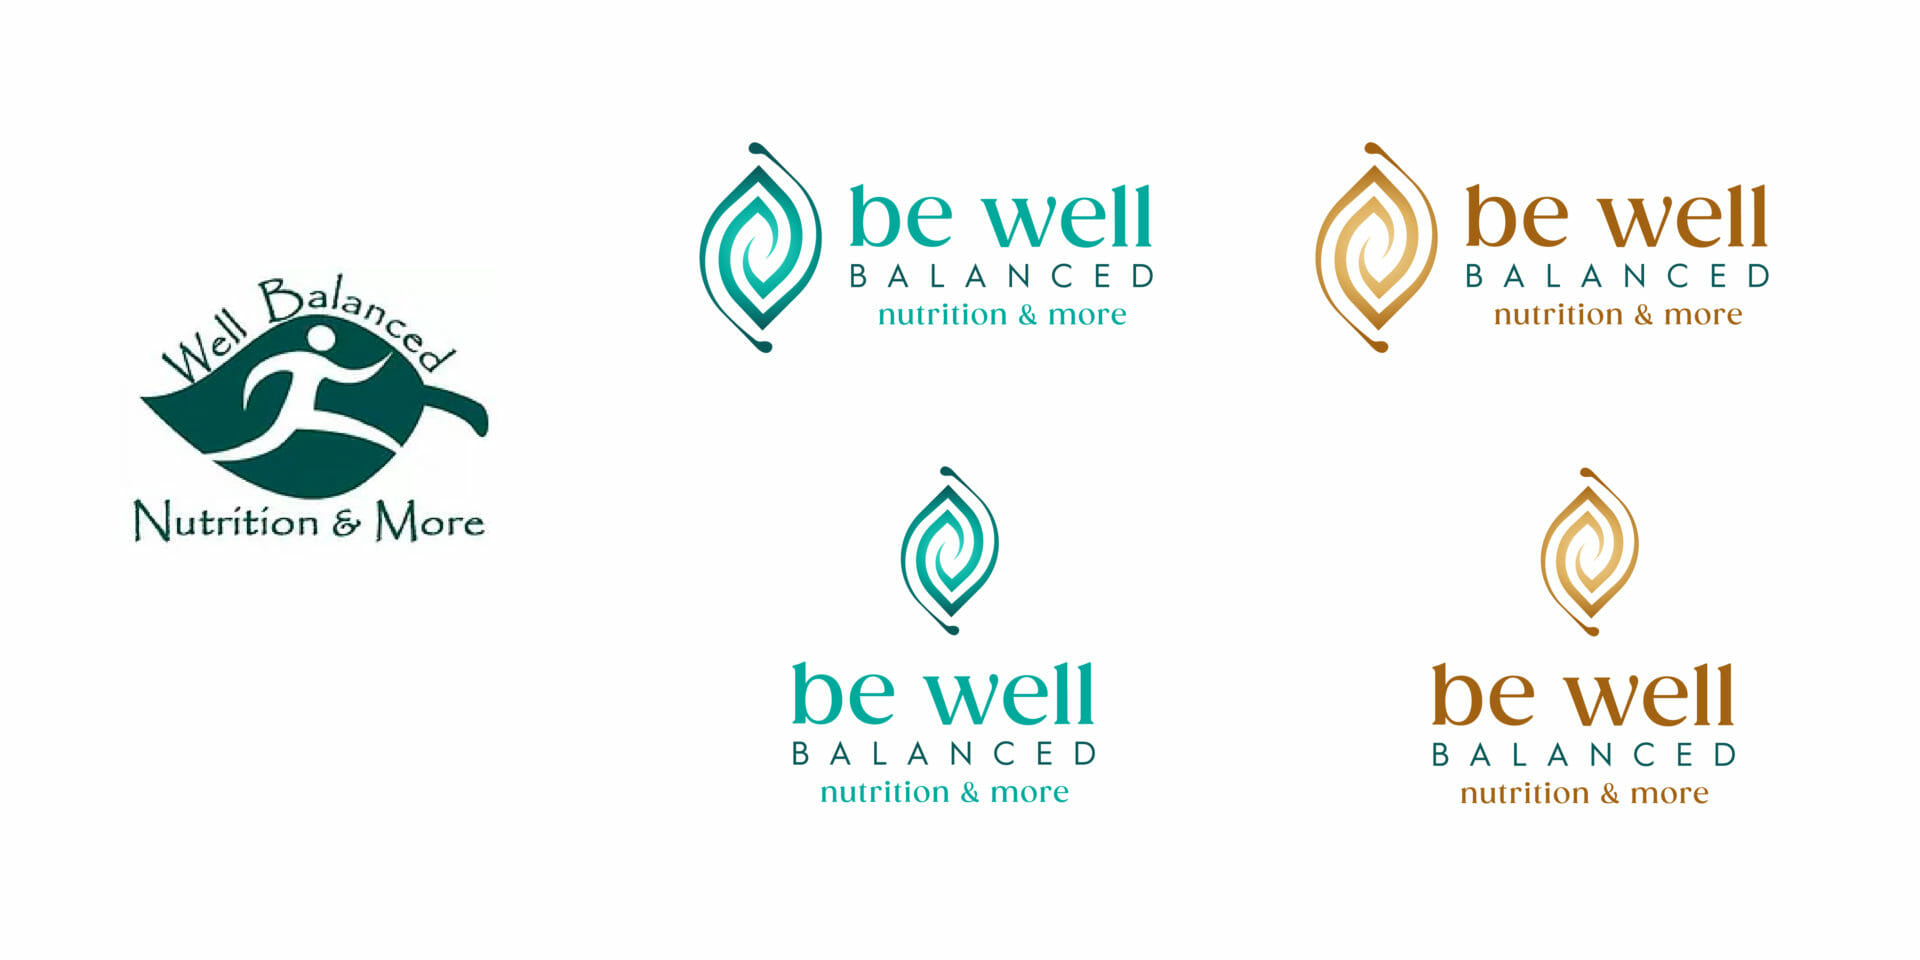 before and after logos for be well balanced